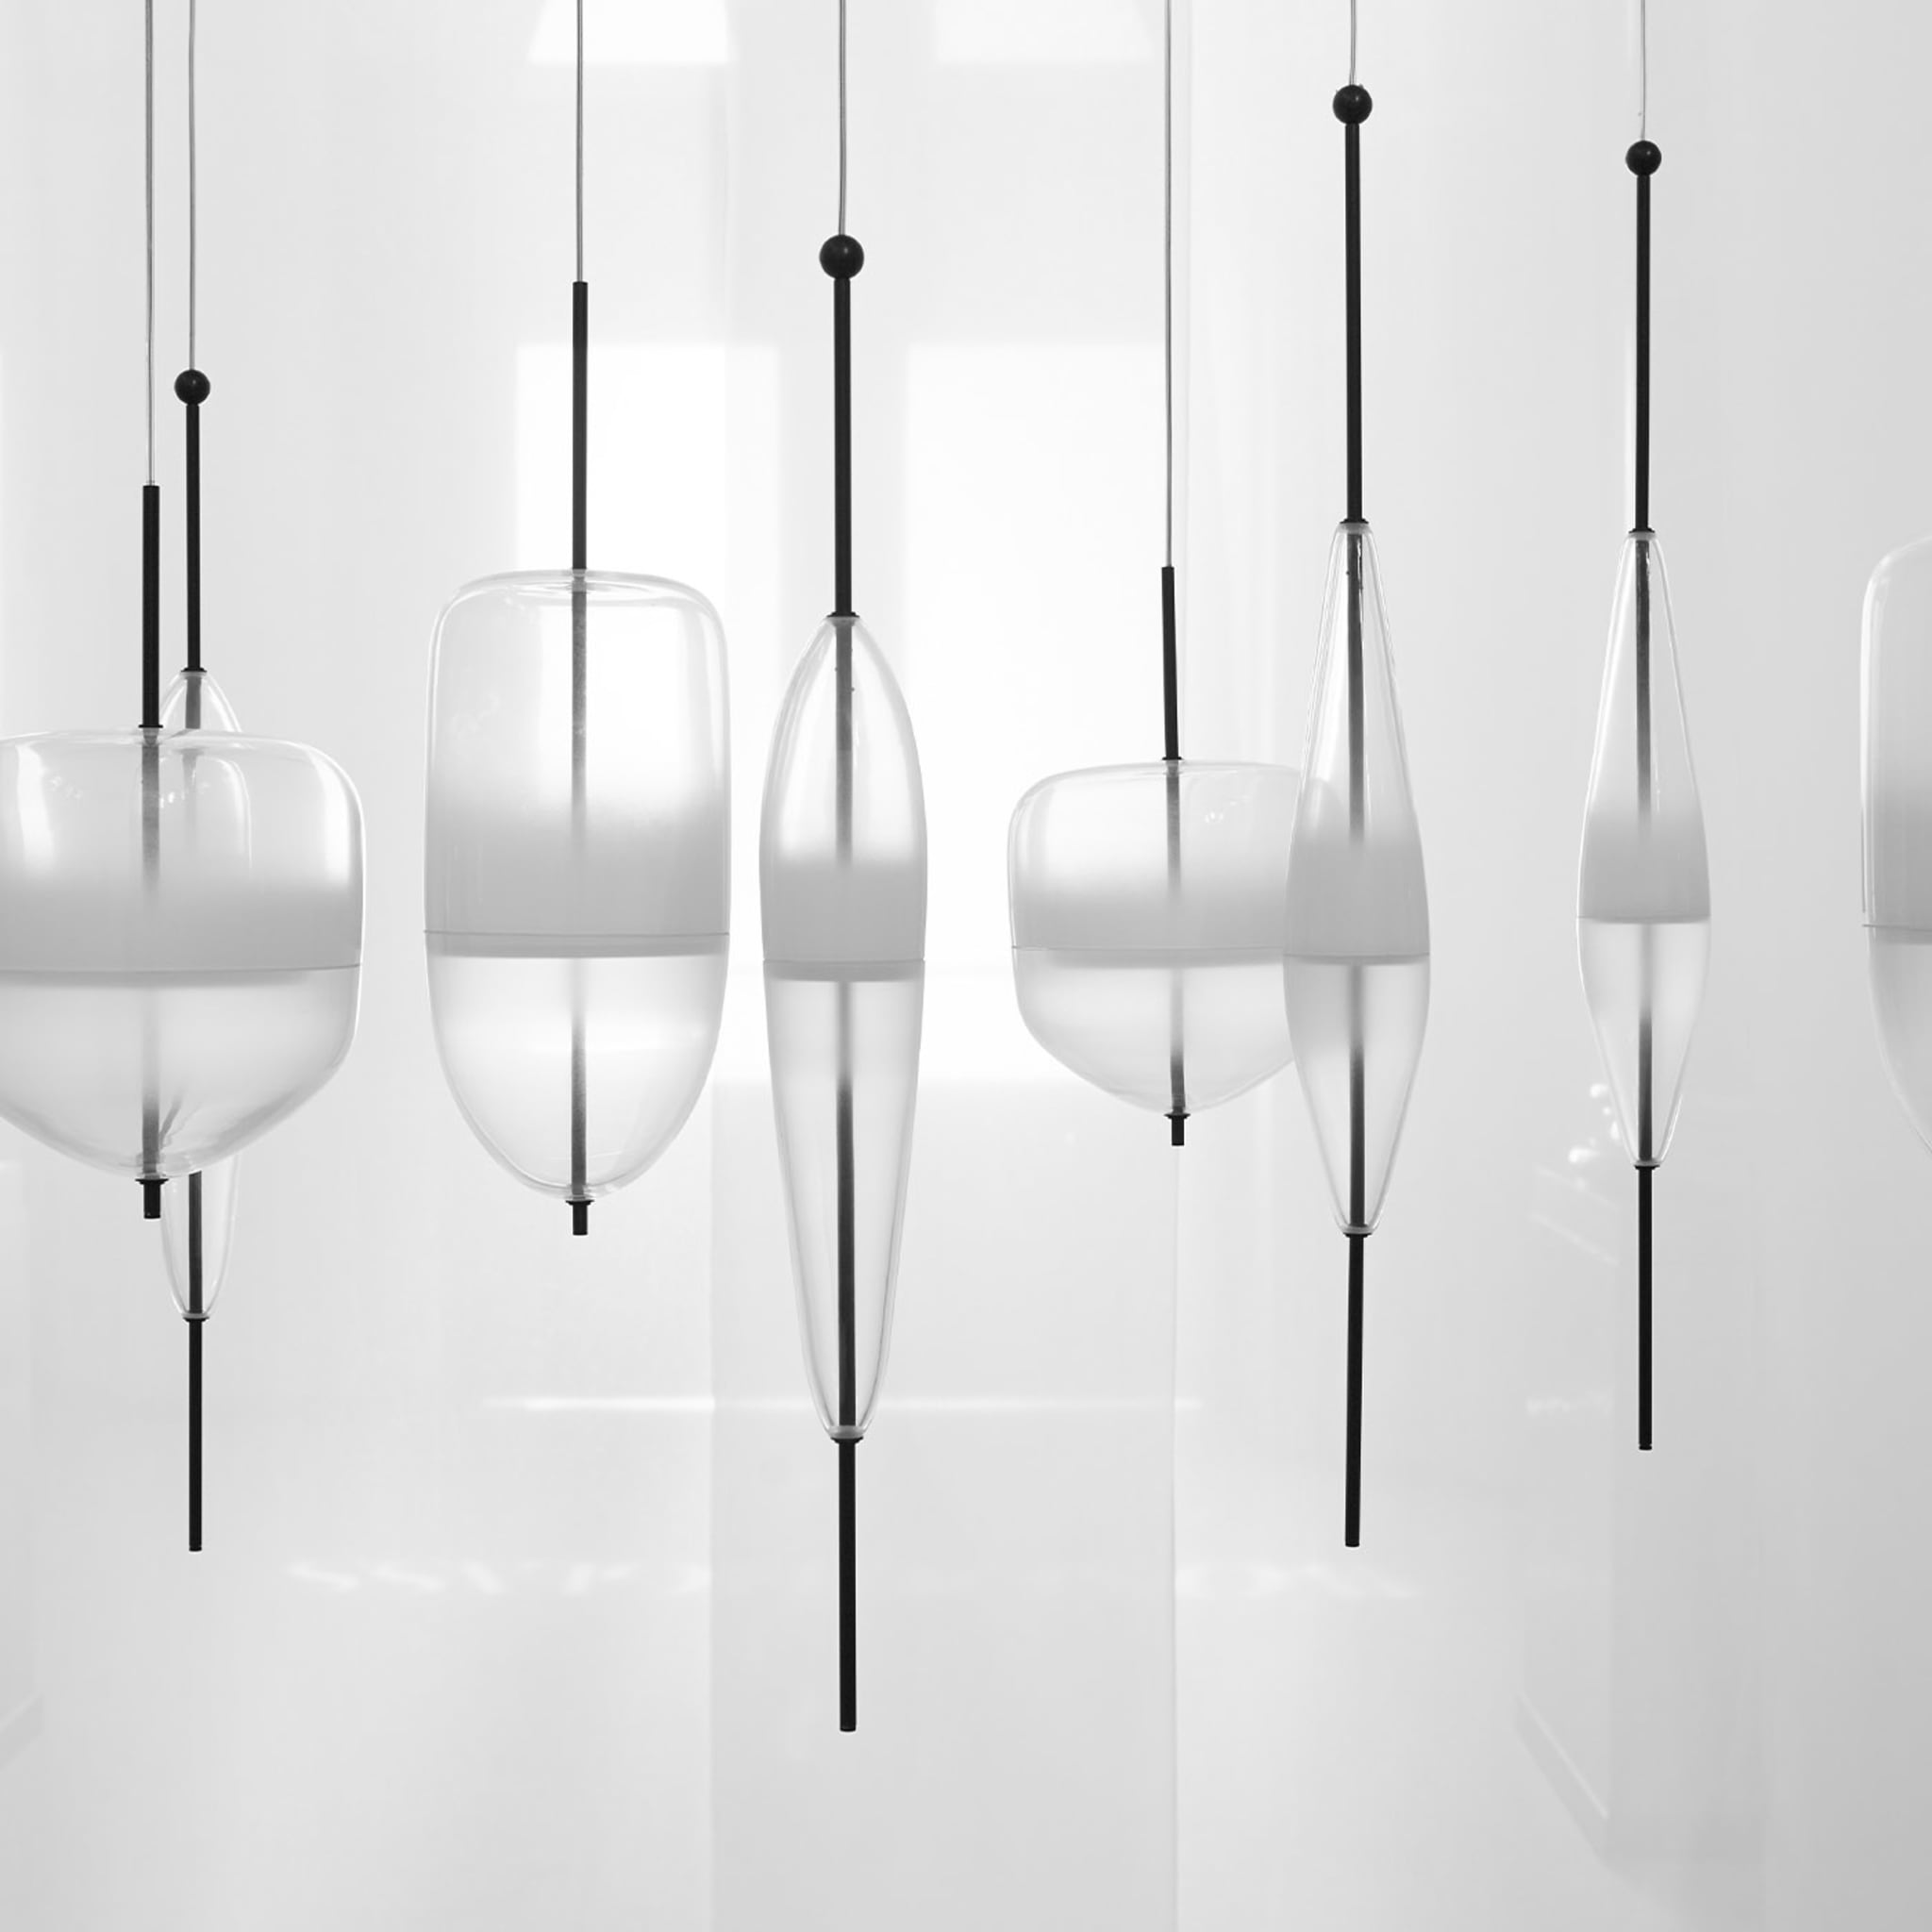 Flow[T] S4 Off White Pendant Lamp by Nao Tamura - Alternative view 1